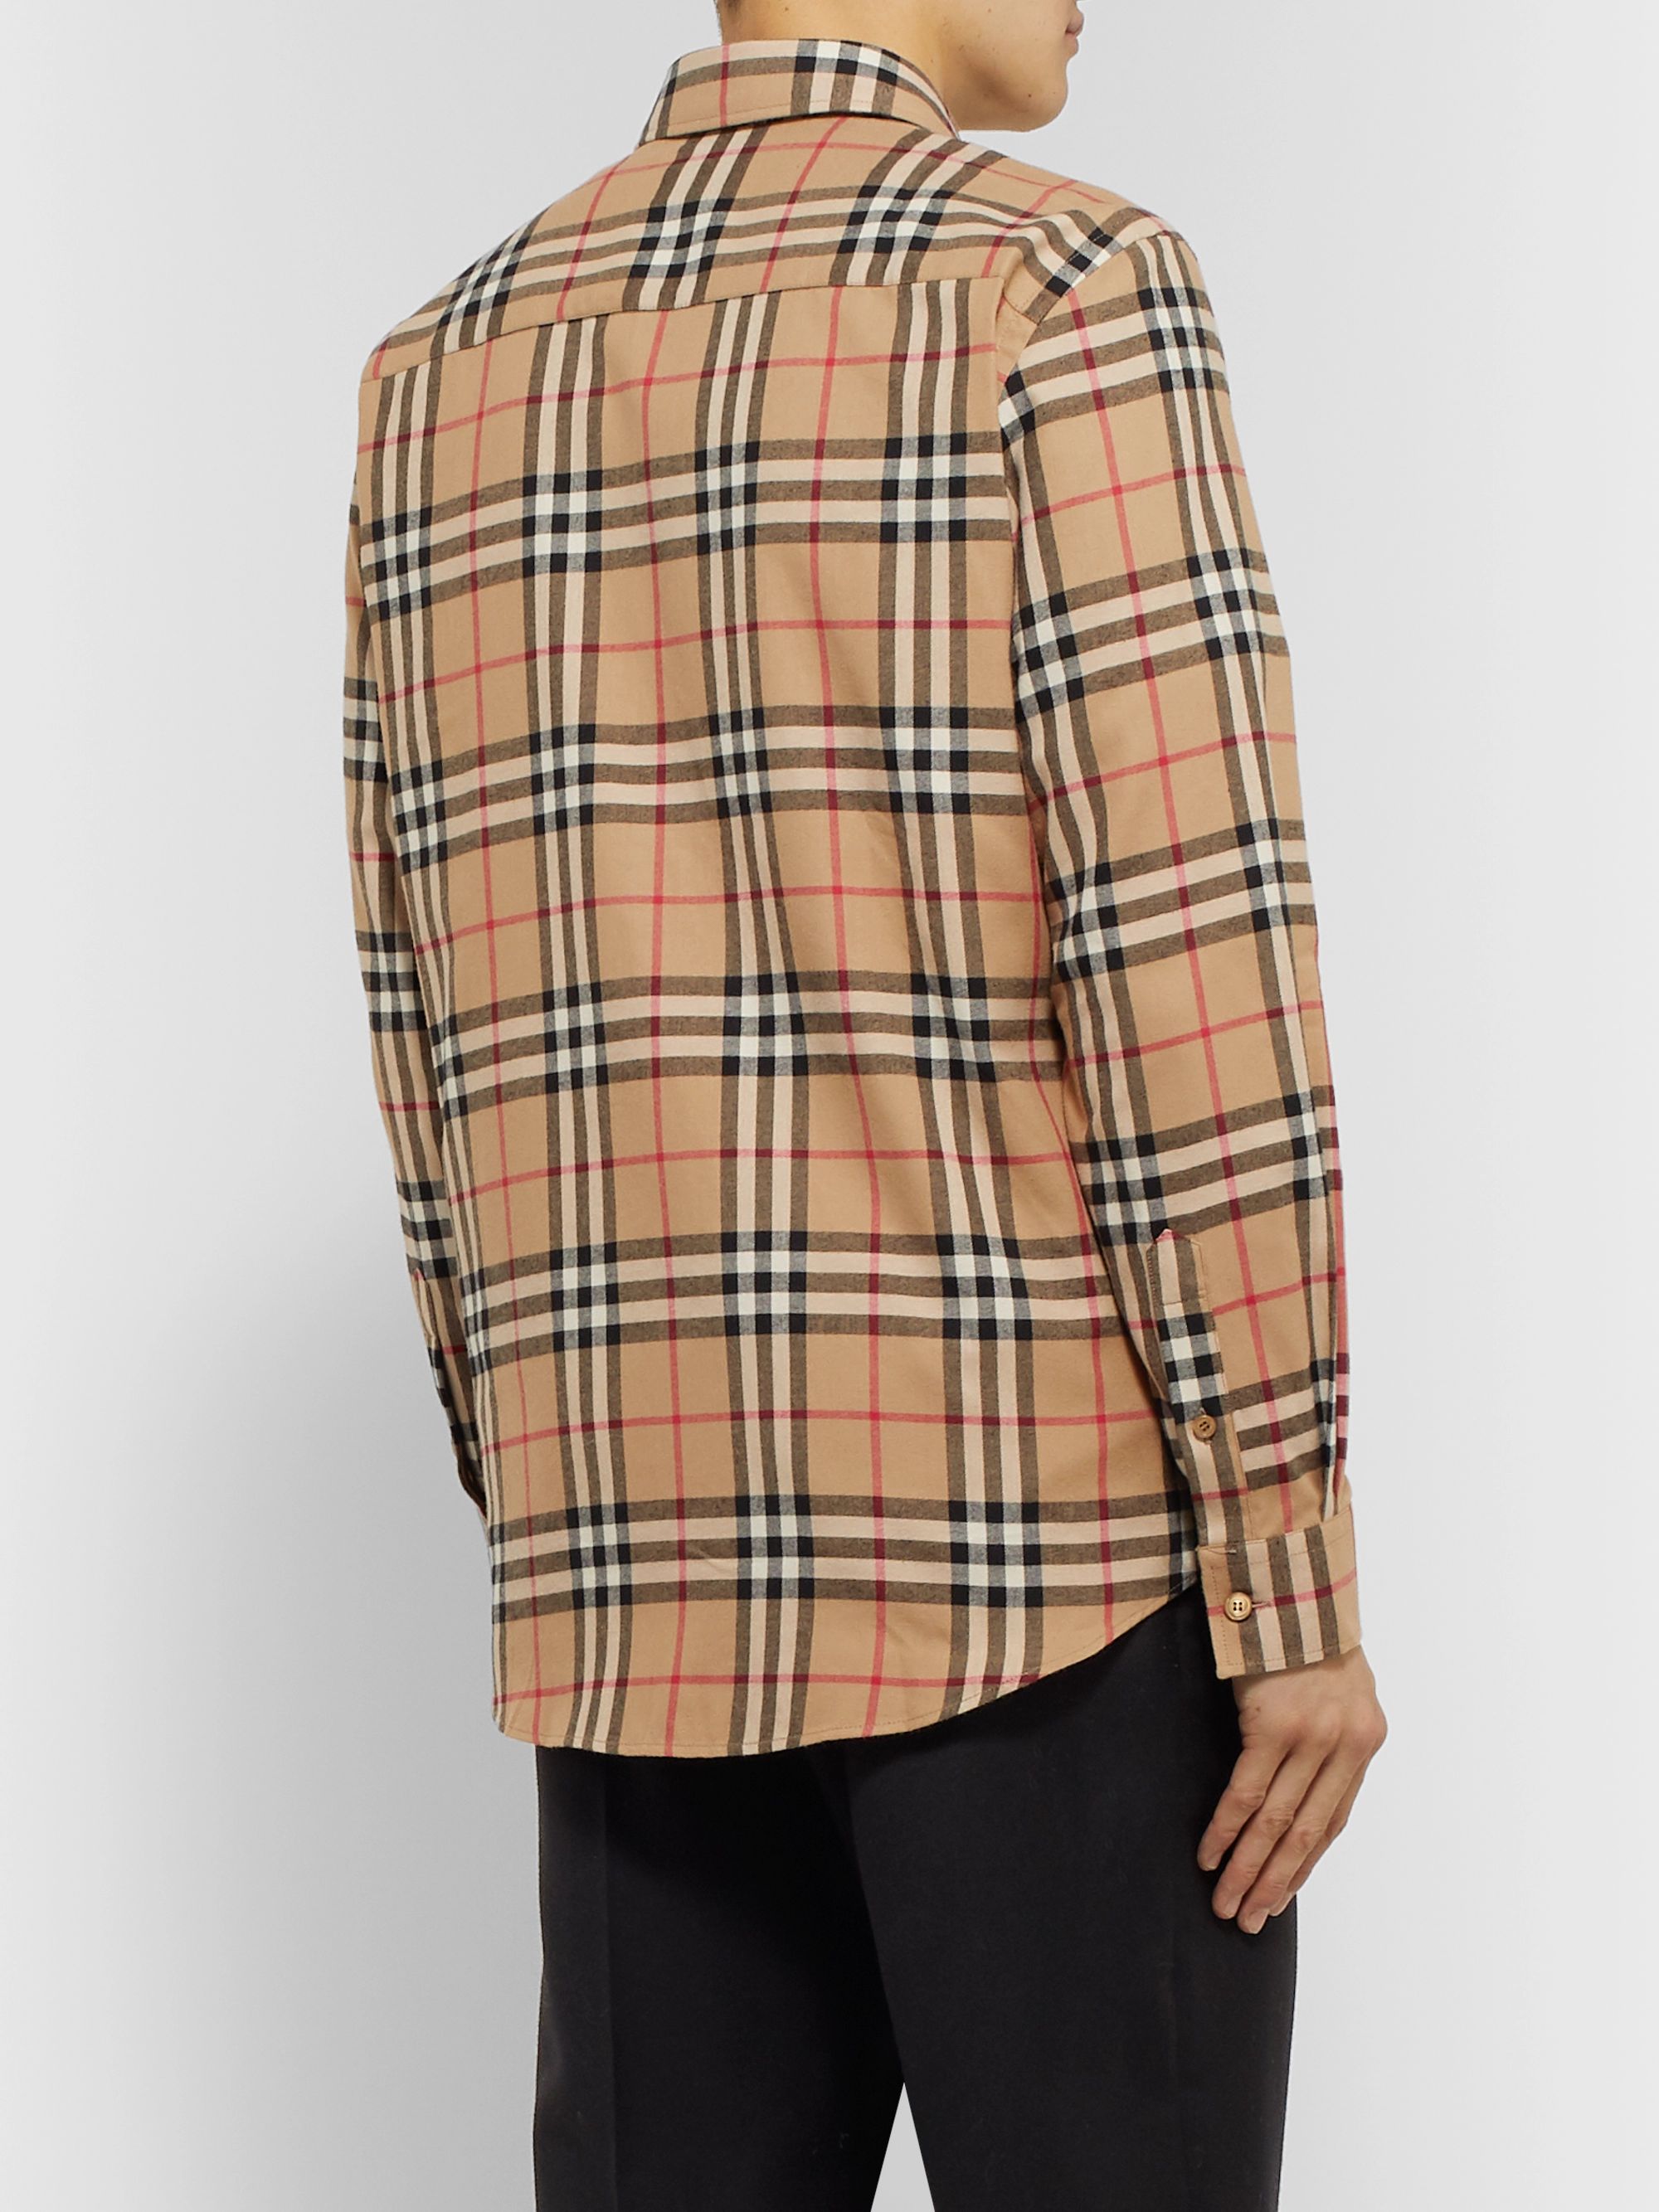 Burberry Check Cotton Flannel Shirt on Sale, 50% OFF 